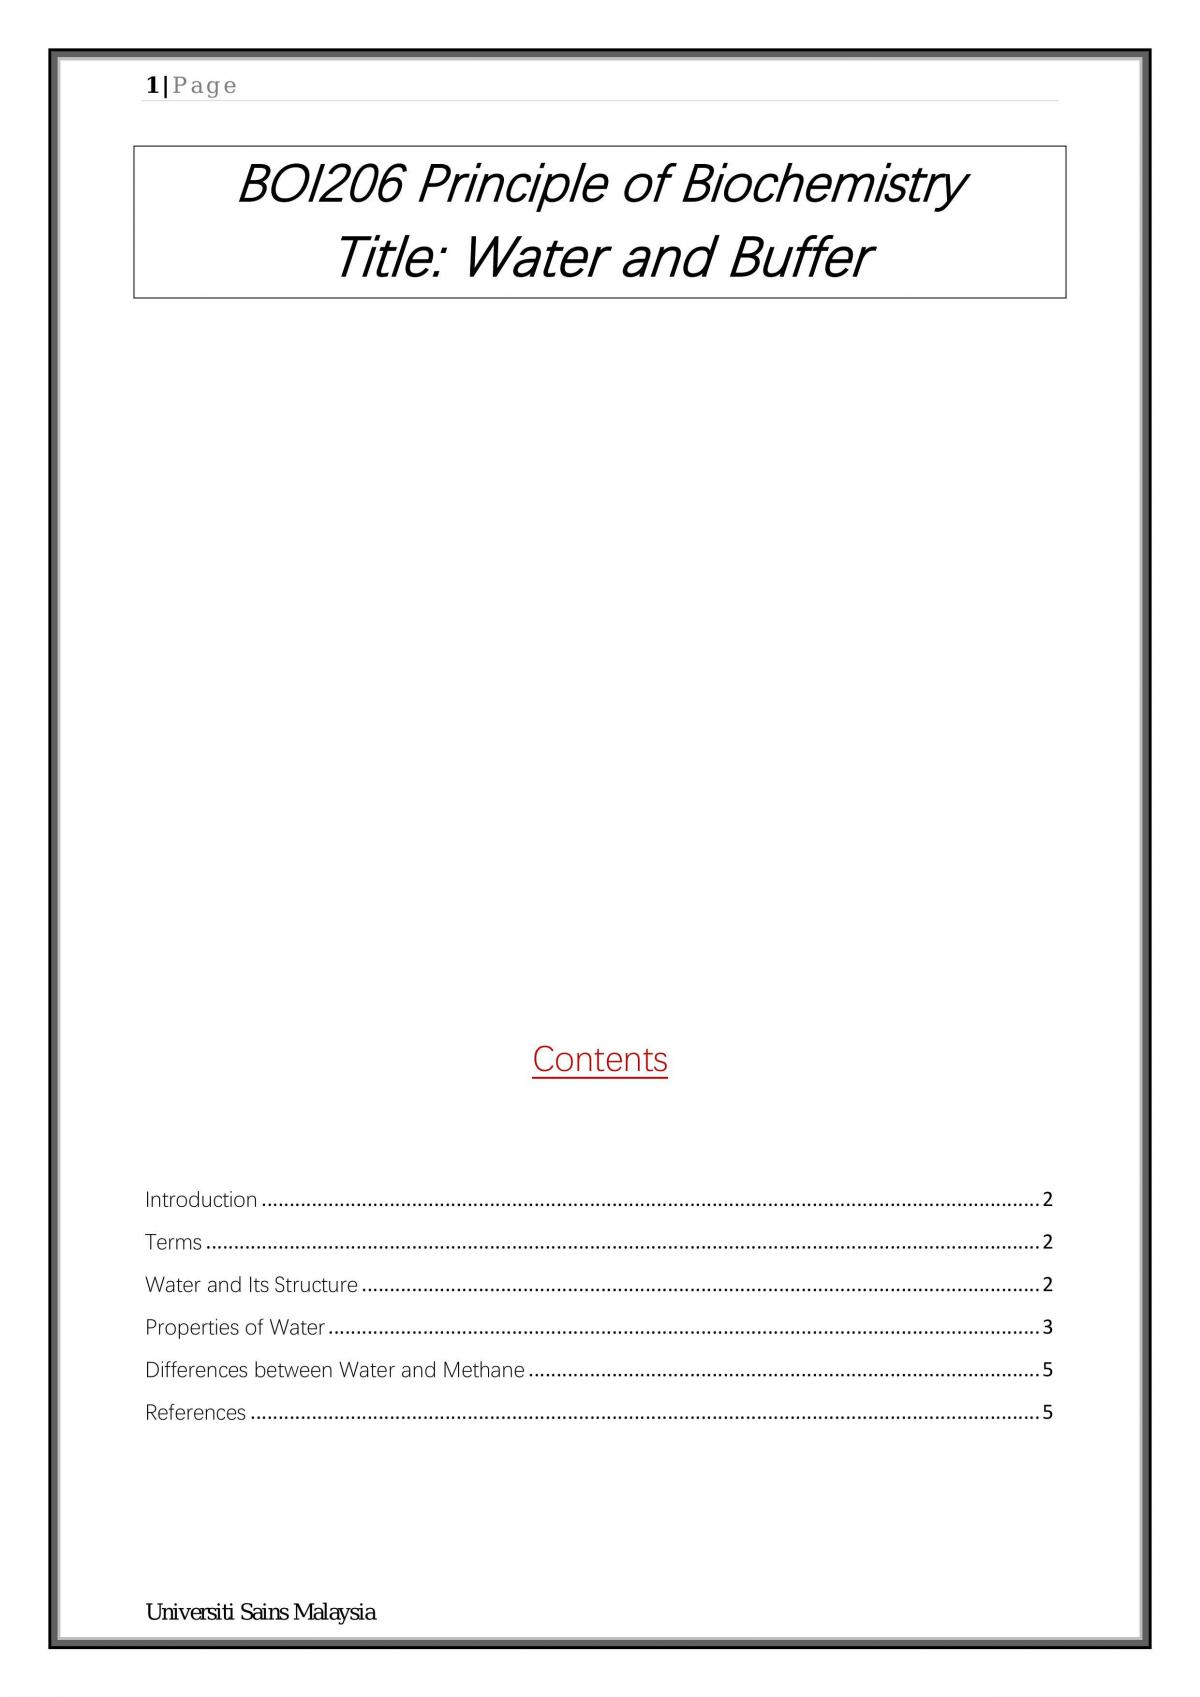 Water and Buffer - Page 1